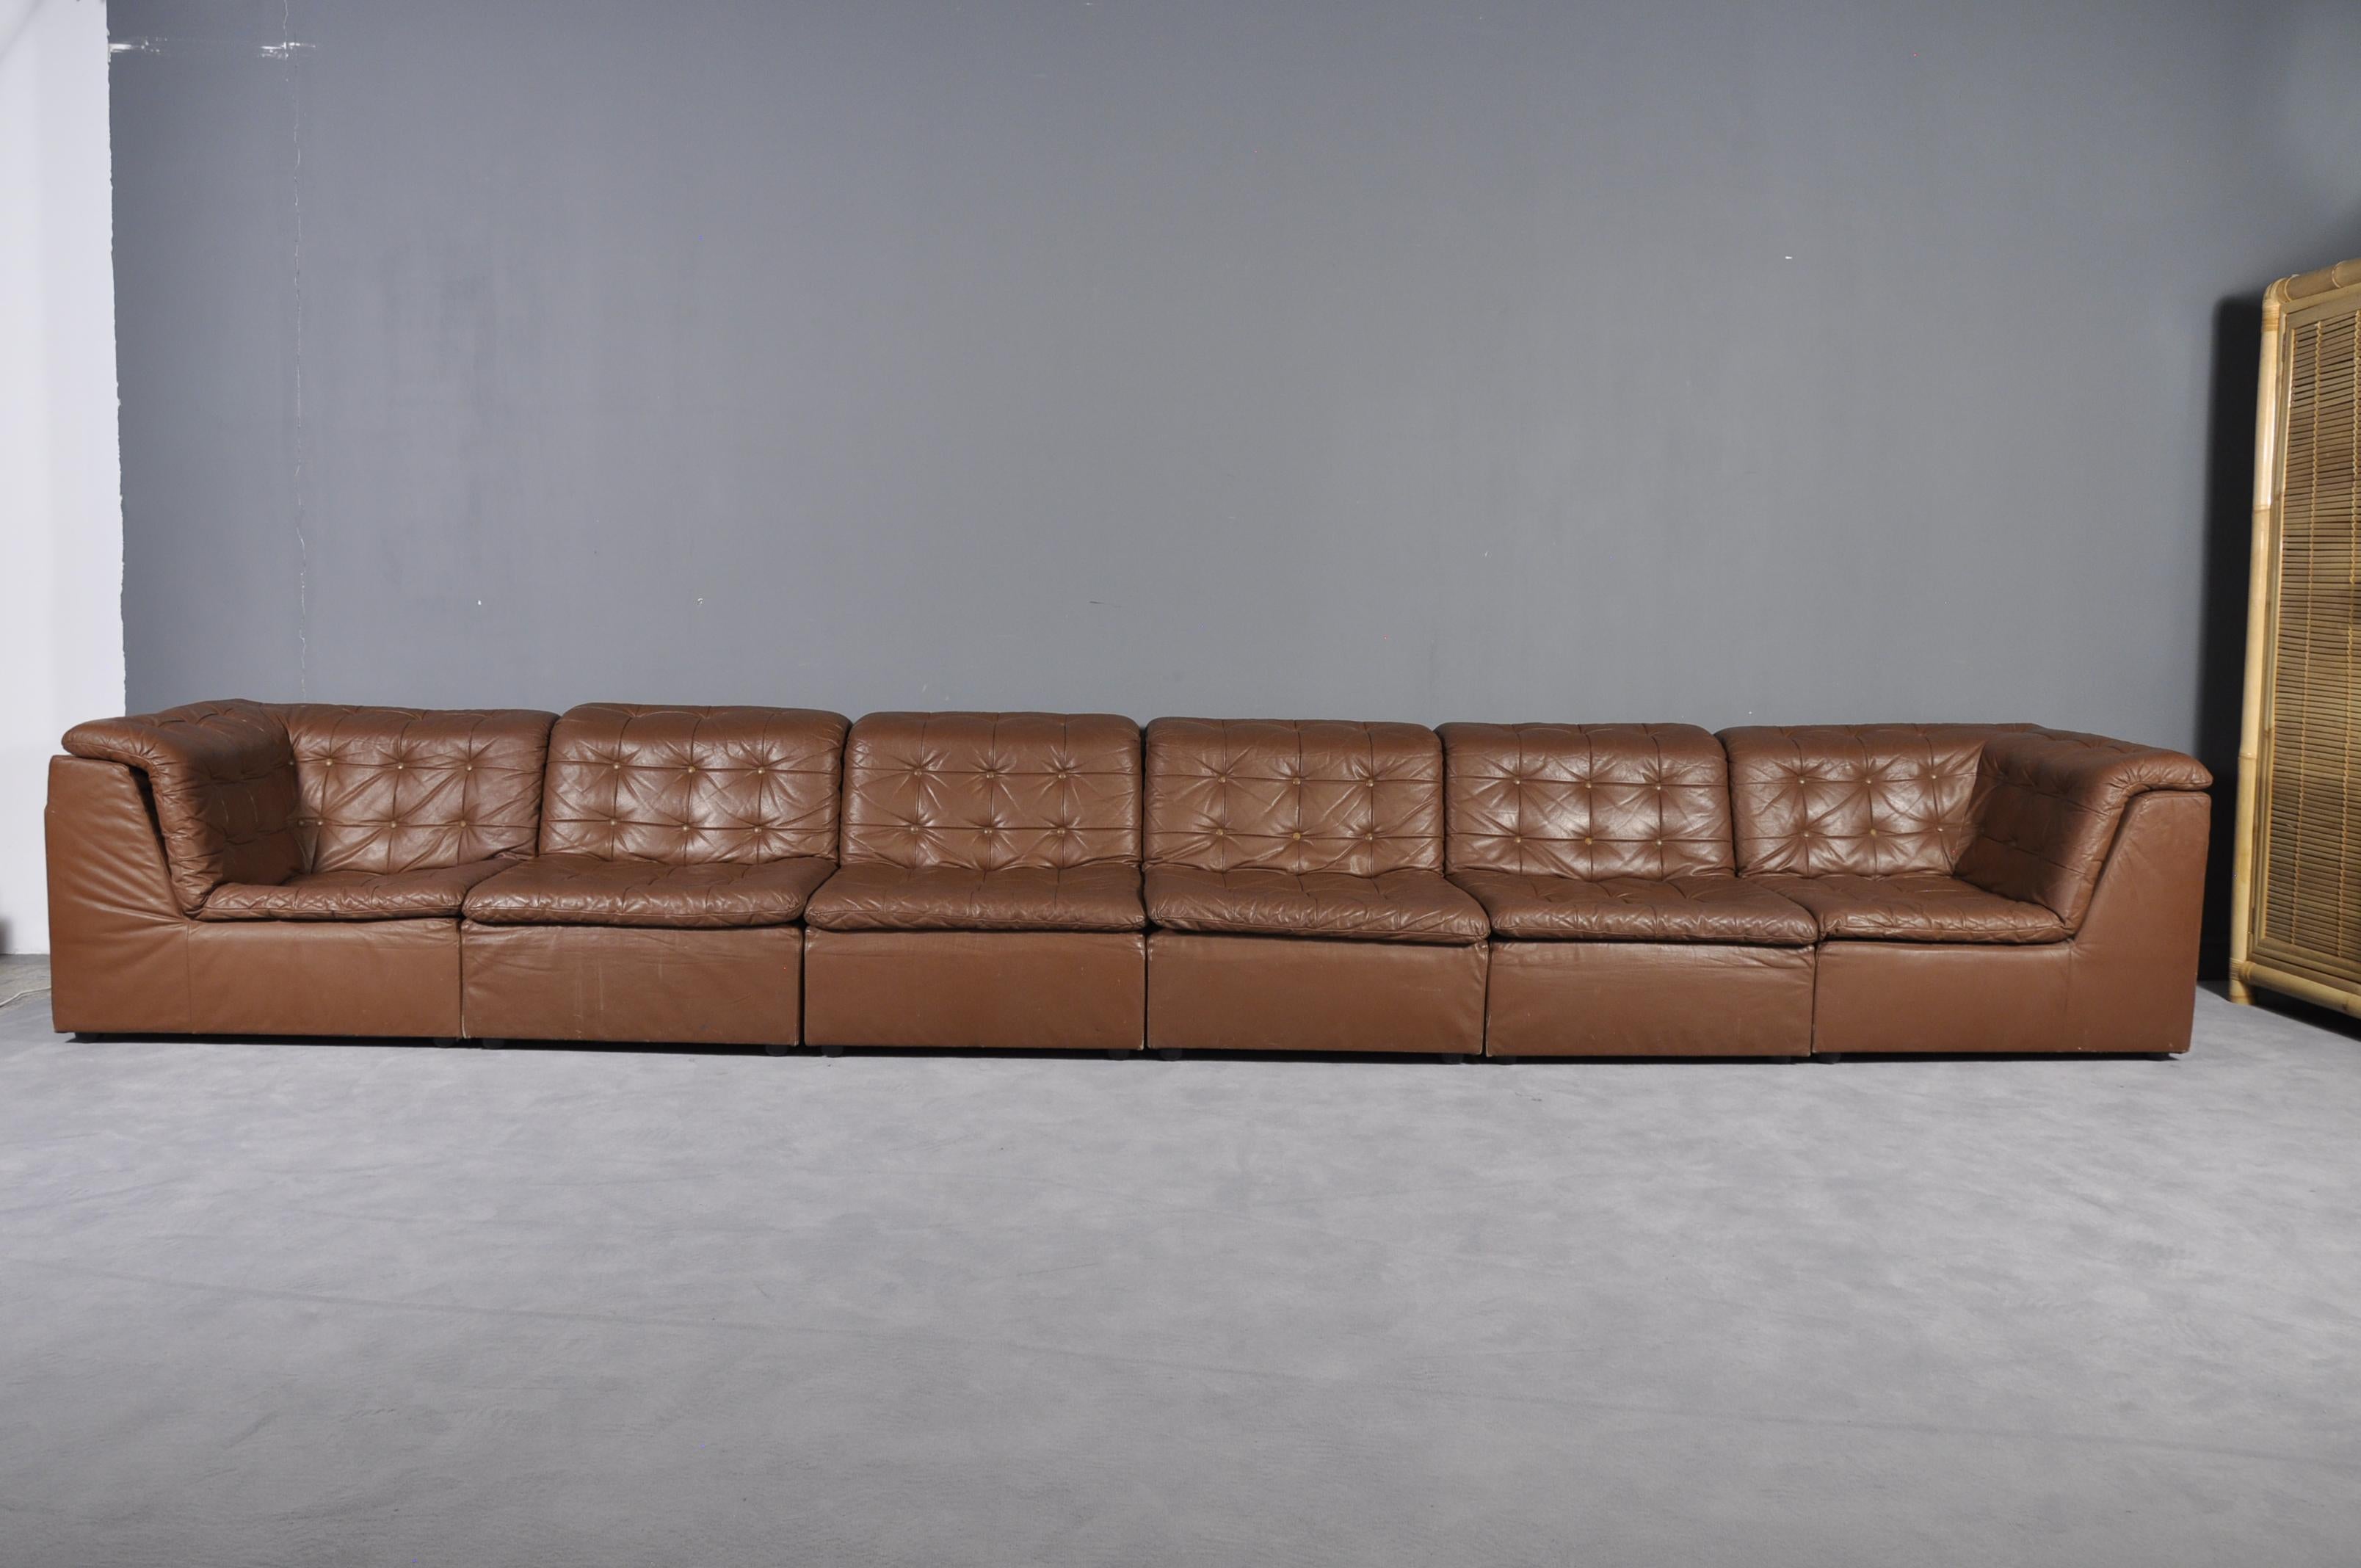 Cognac Leather “De Sede Style” Patchwork Modular Sofa from Laauser, Germany 1970 For Sale 4